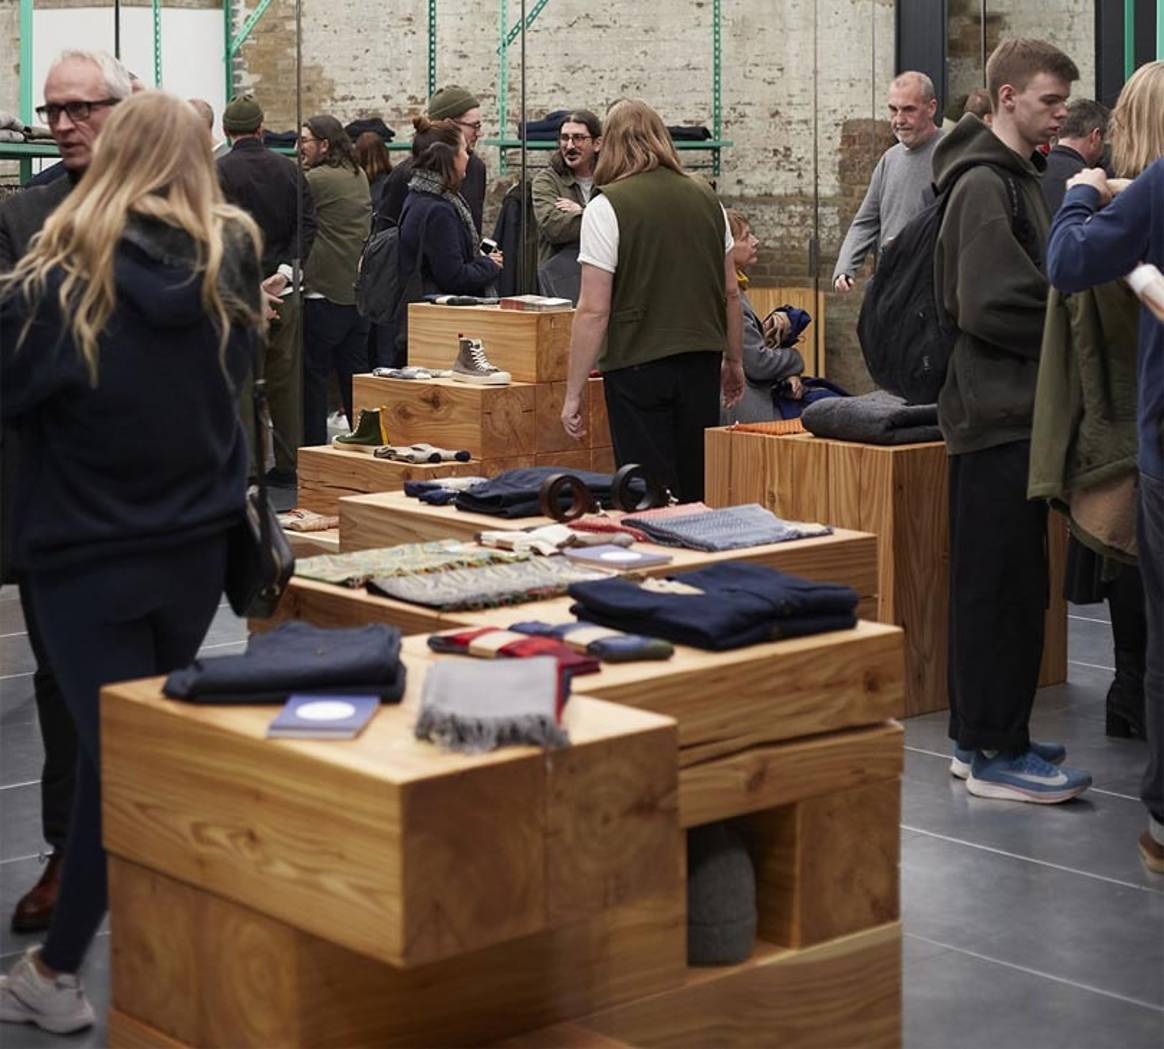 In pictures: UK menswear brand Universal Works opens second London store